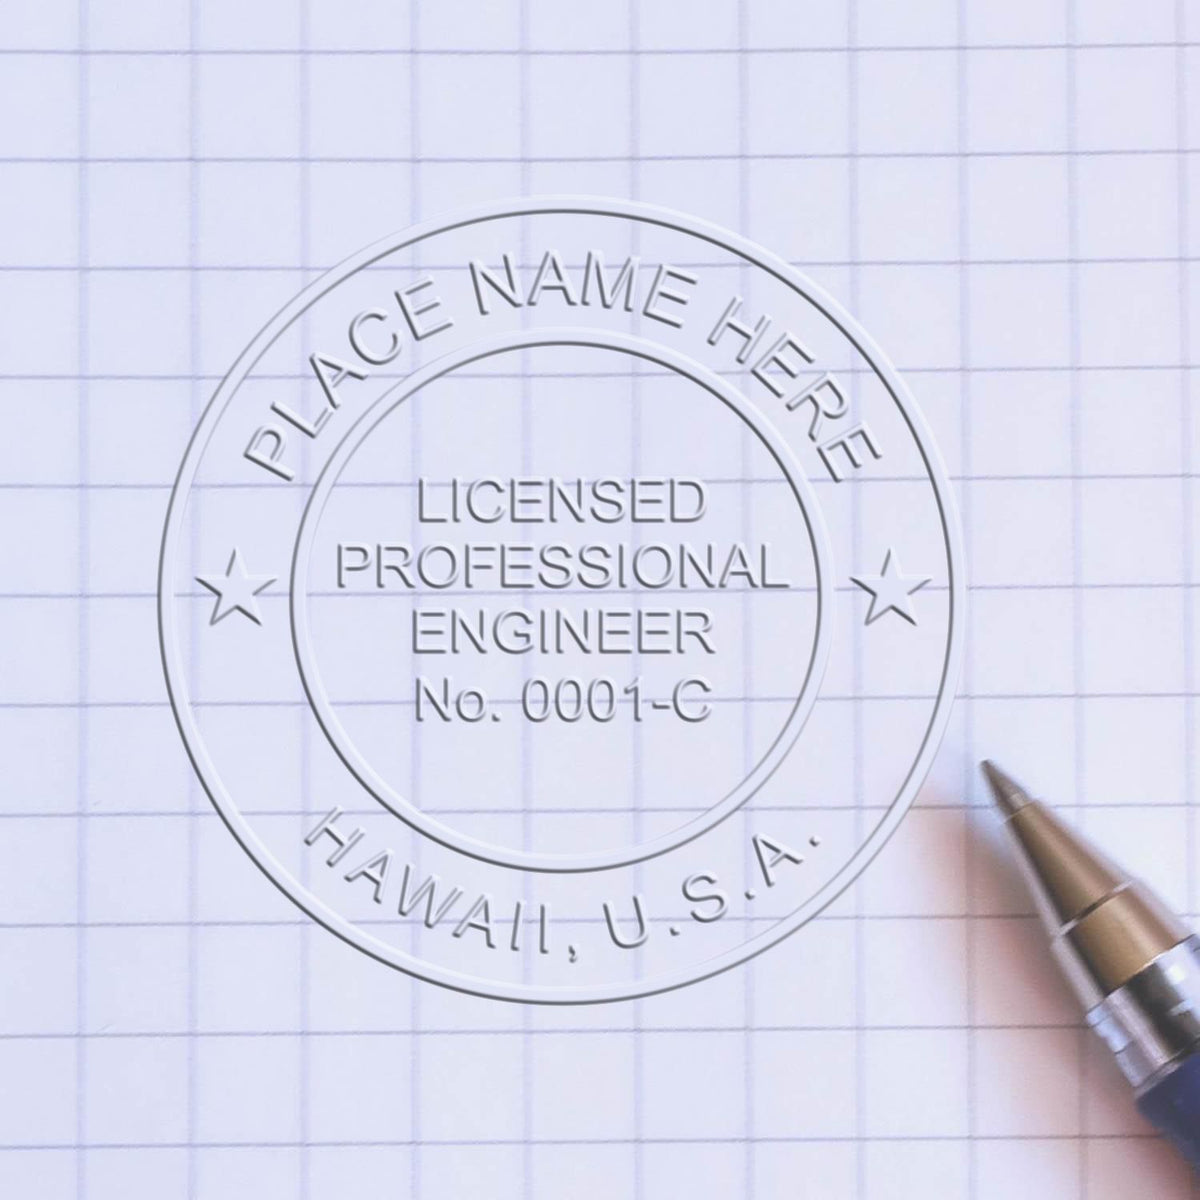 A photograph of the Long Reach Hawaii PE Seal stamp impression reveals a vivid, professional image of the on paper.